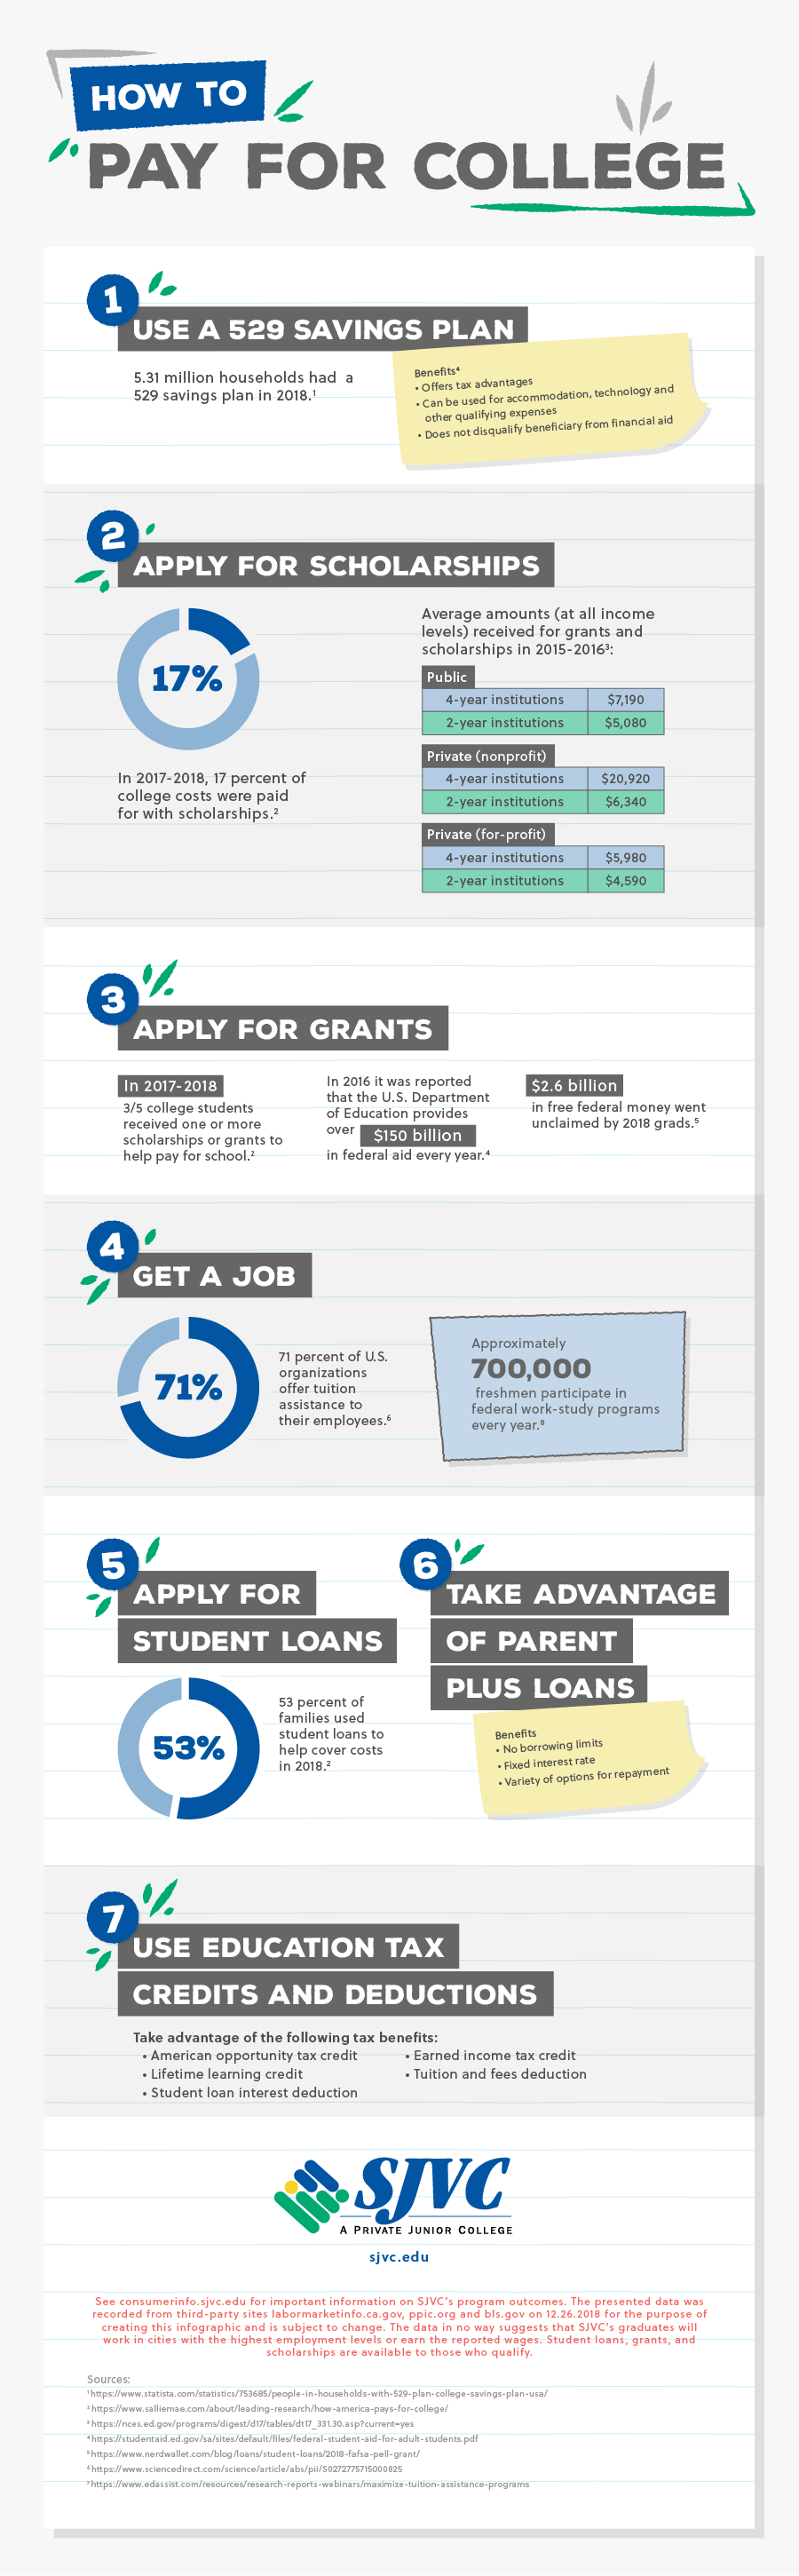 How to Pay for College [Infographic]